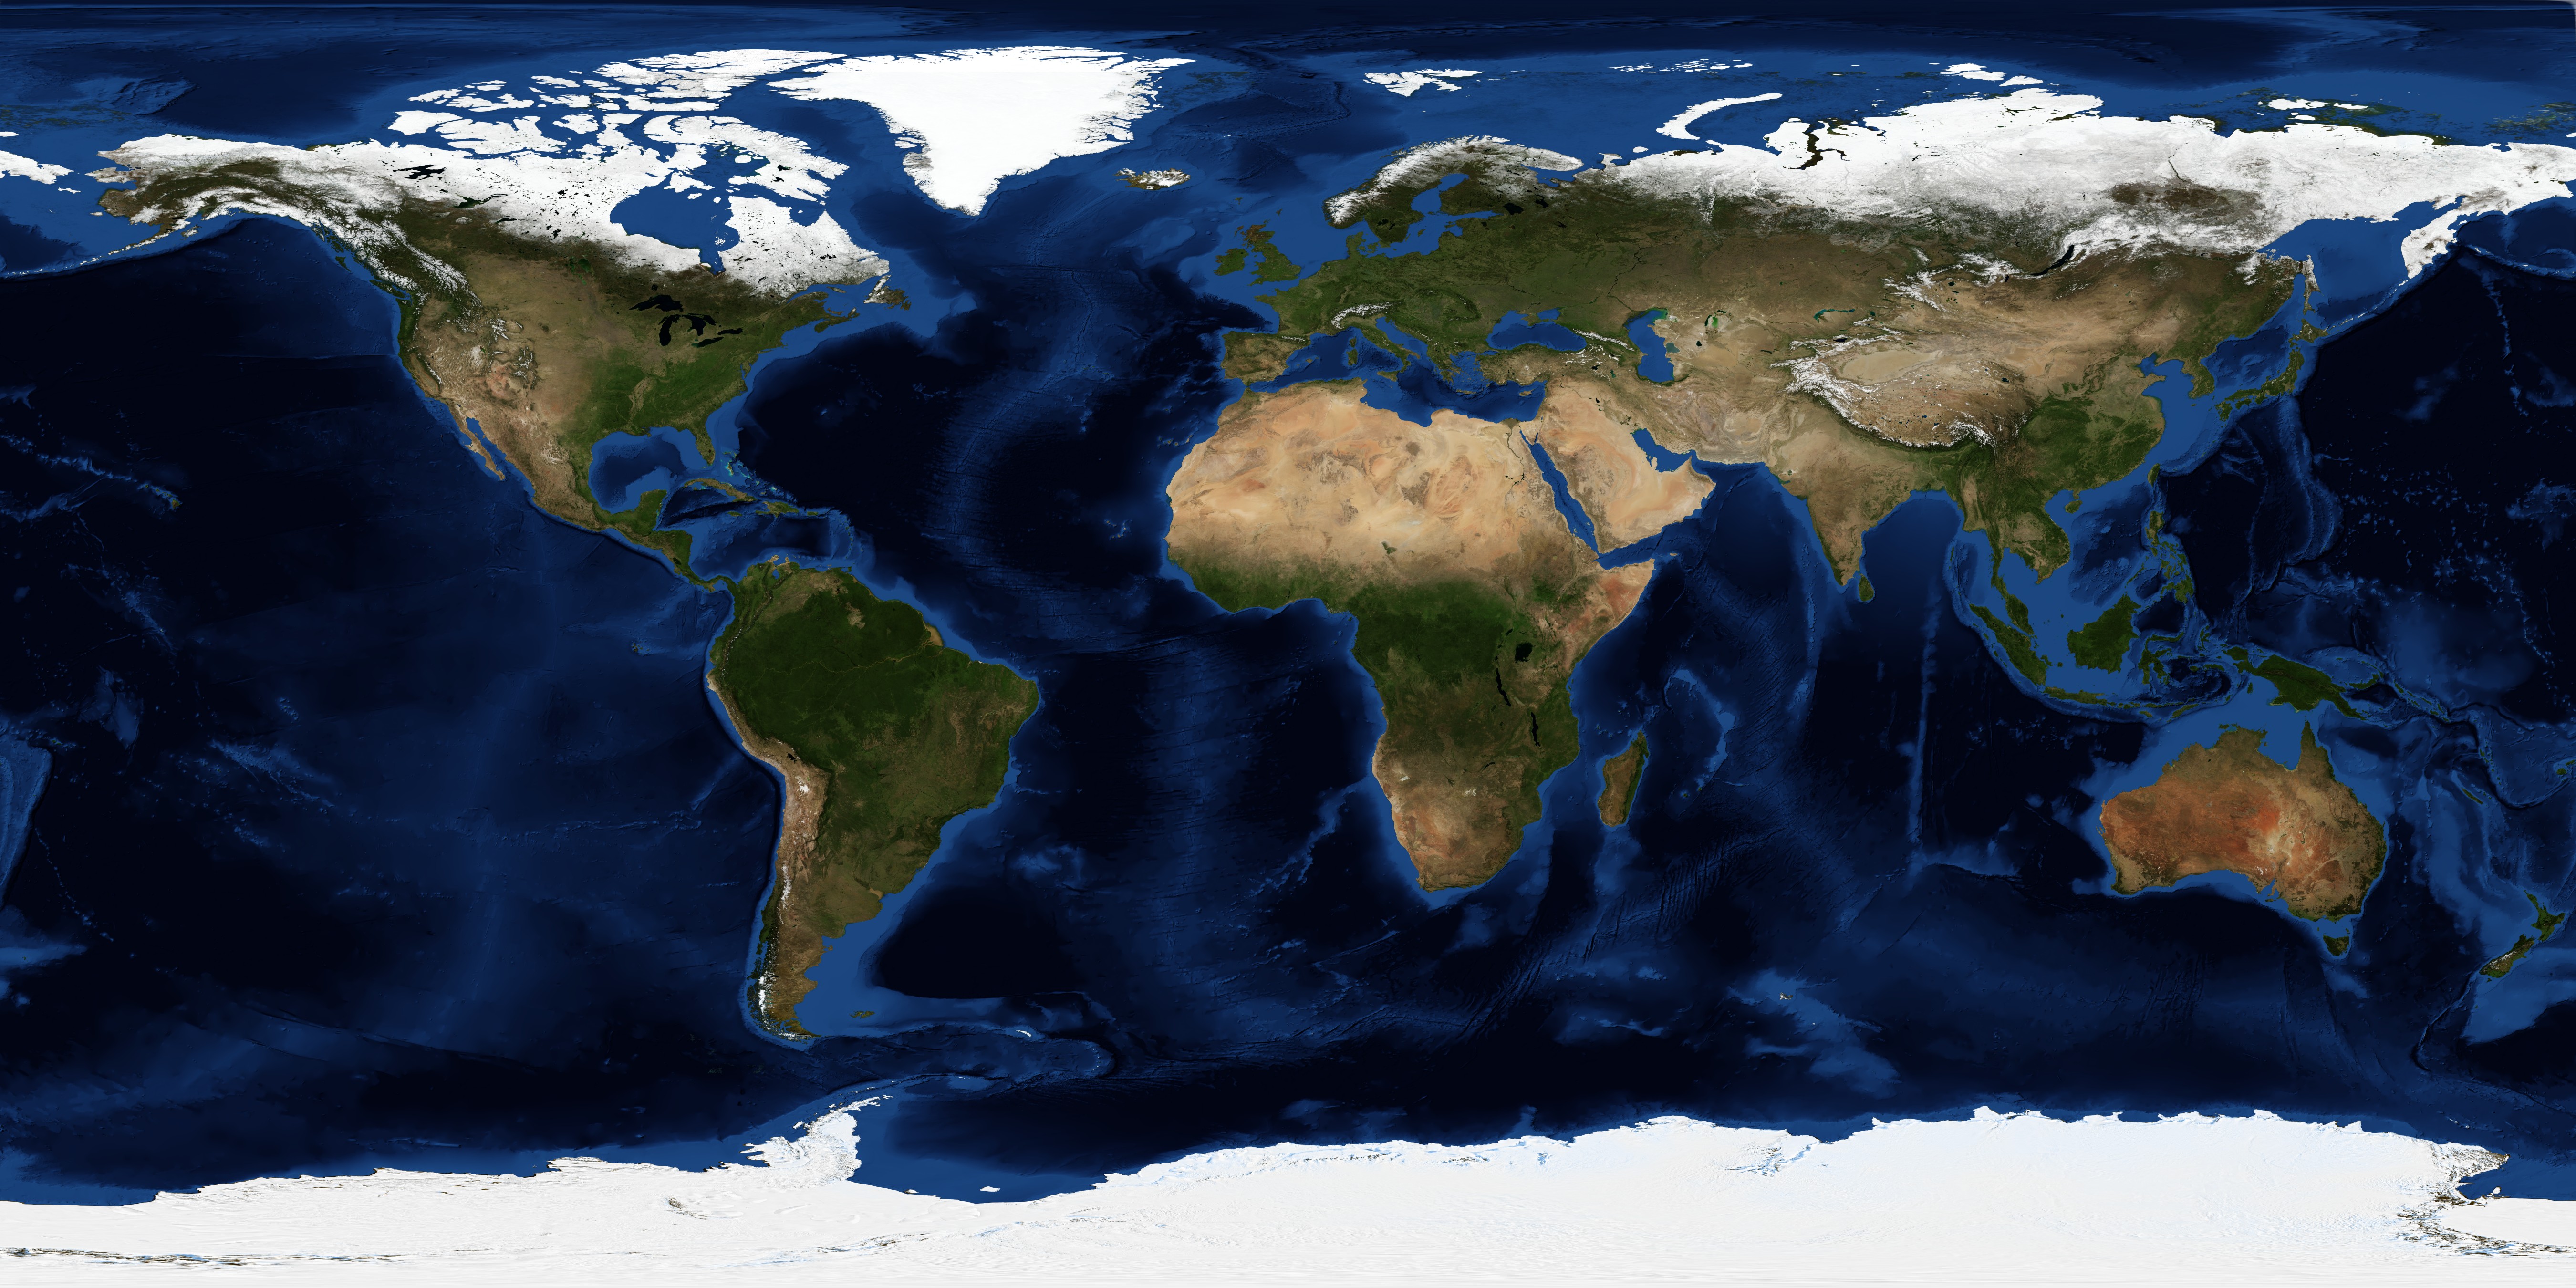 May, Blue Marble Next Generation w/ Topography and Bathymetry - related image preview